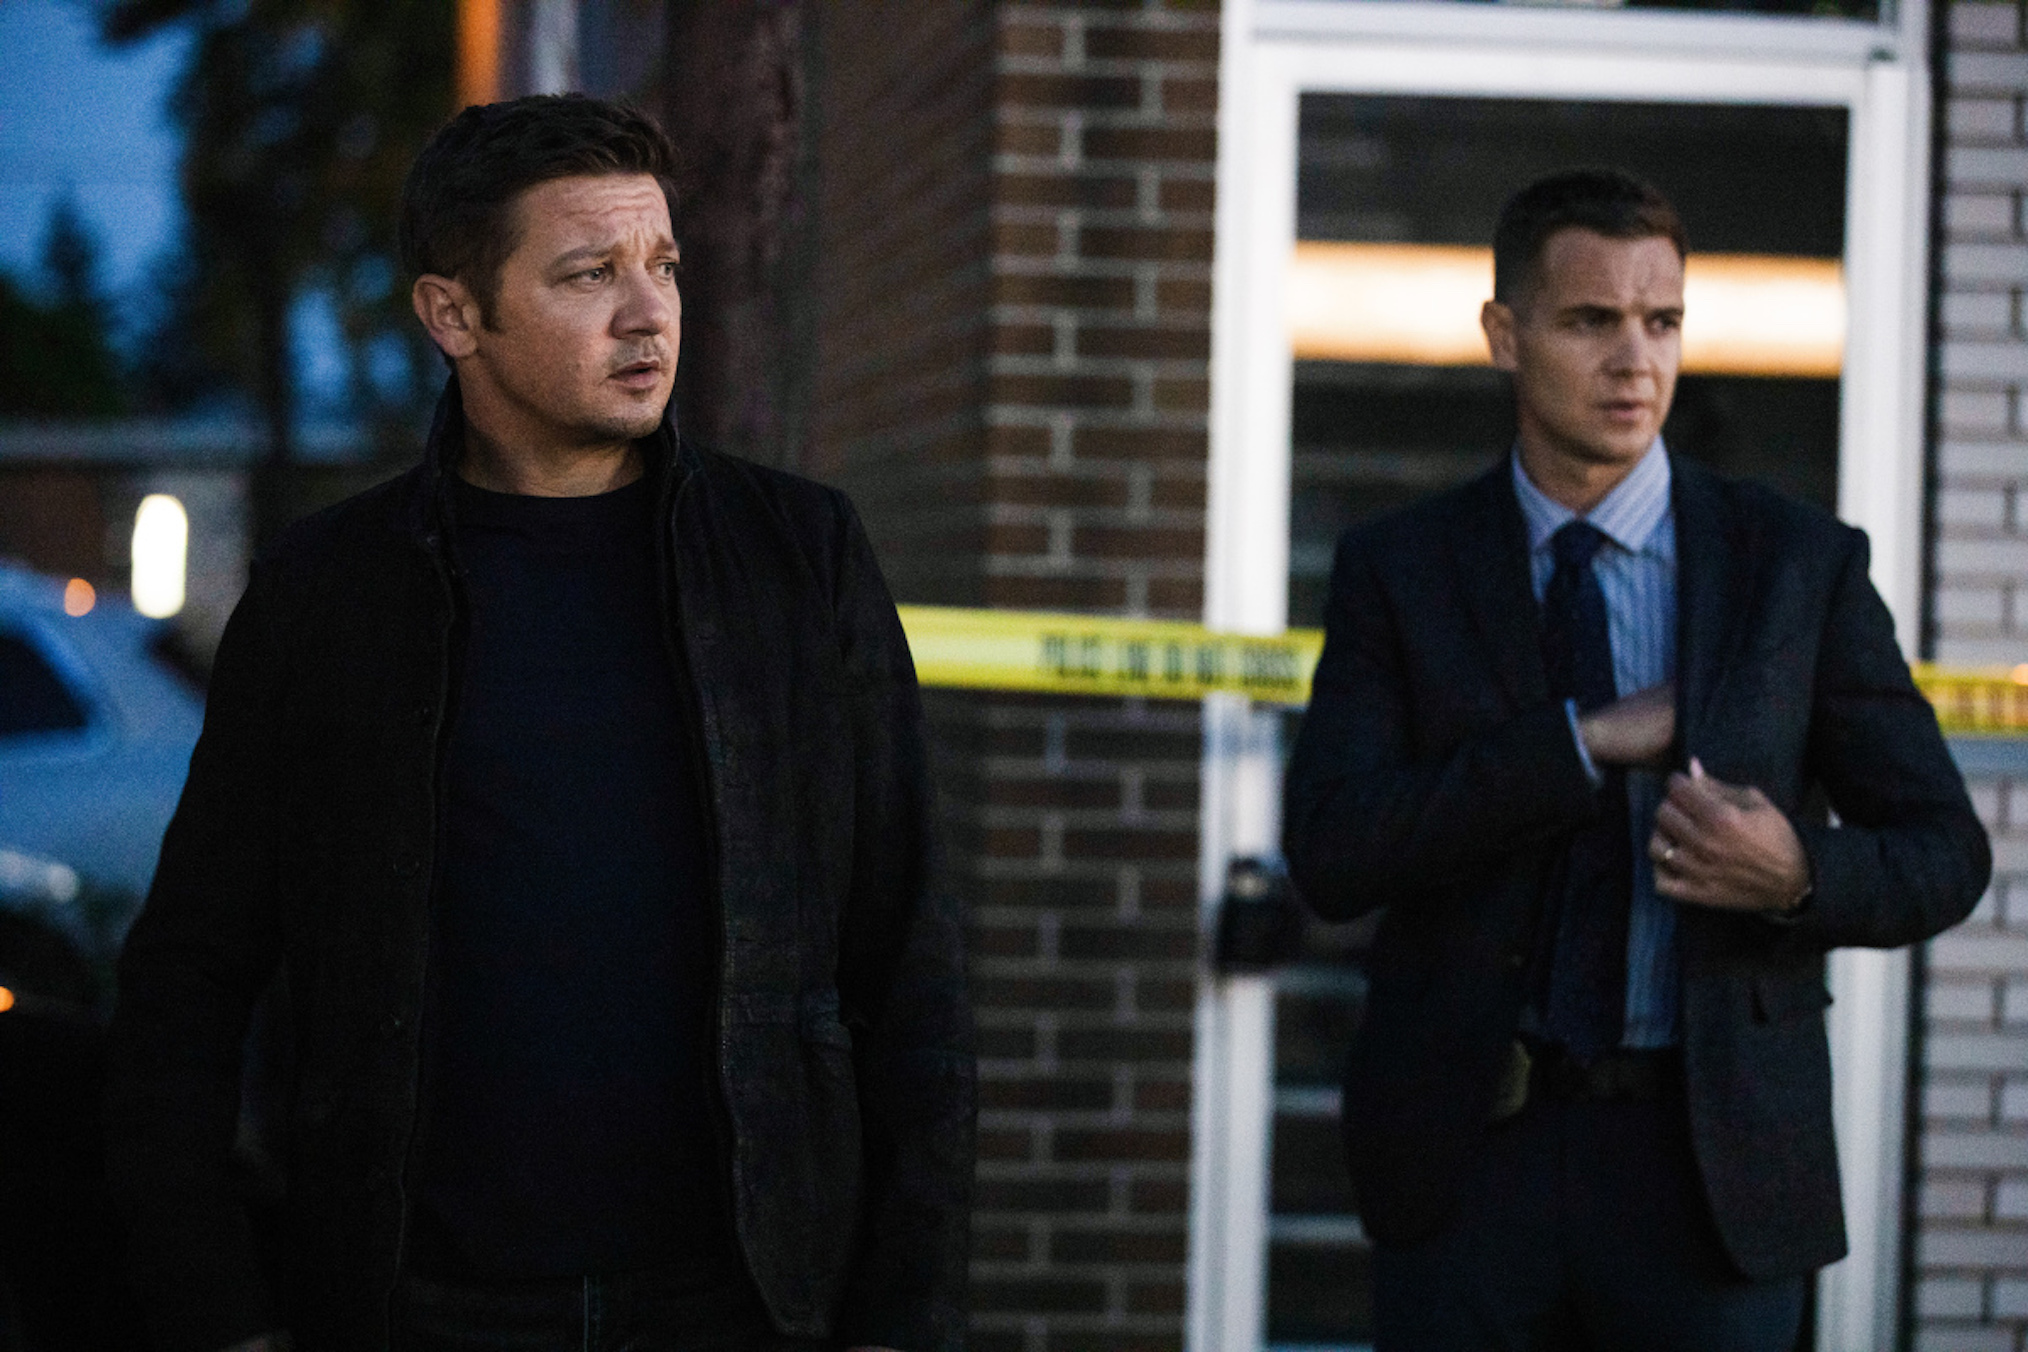 Jeremy Renner as Mike, Taylor Handley as Kyle in Mayor of Kingstown